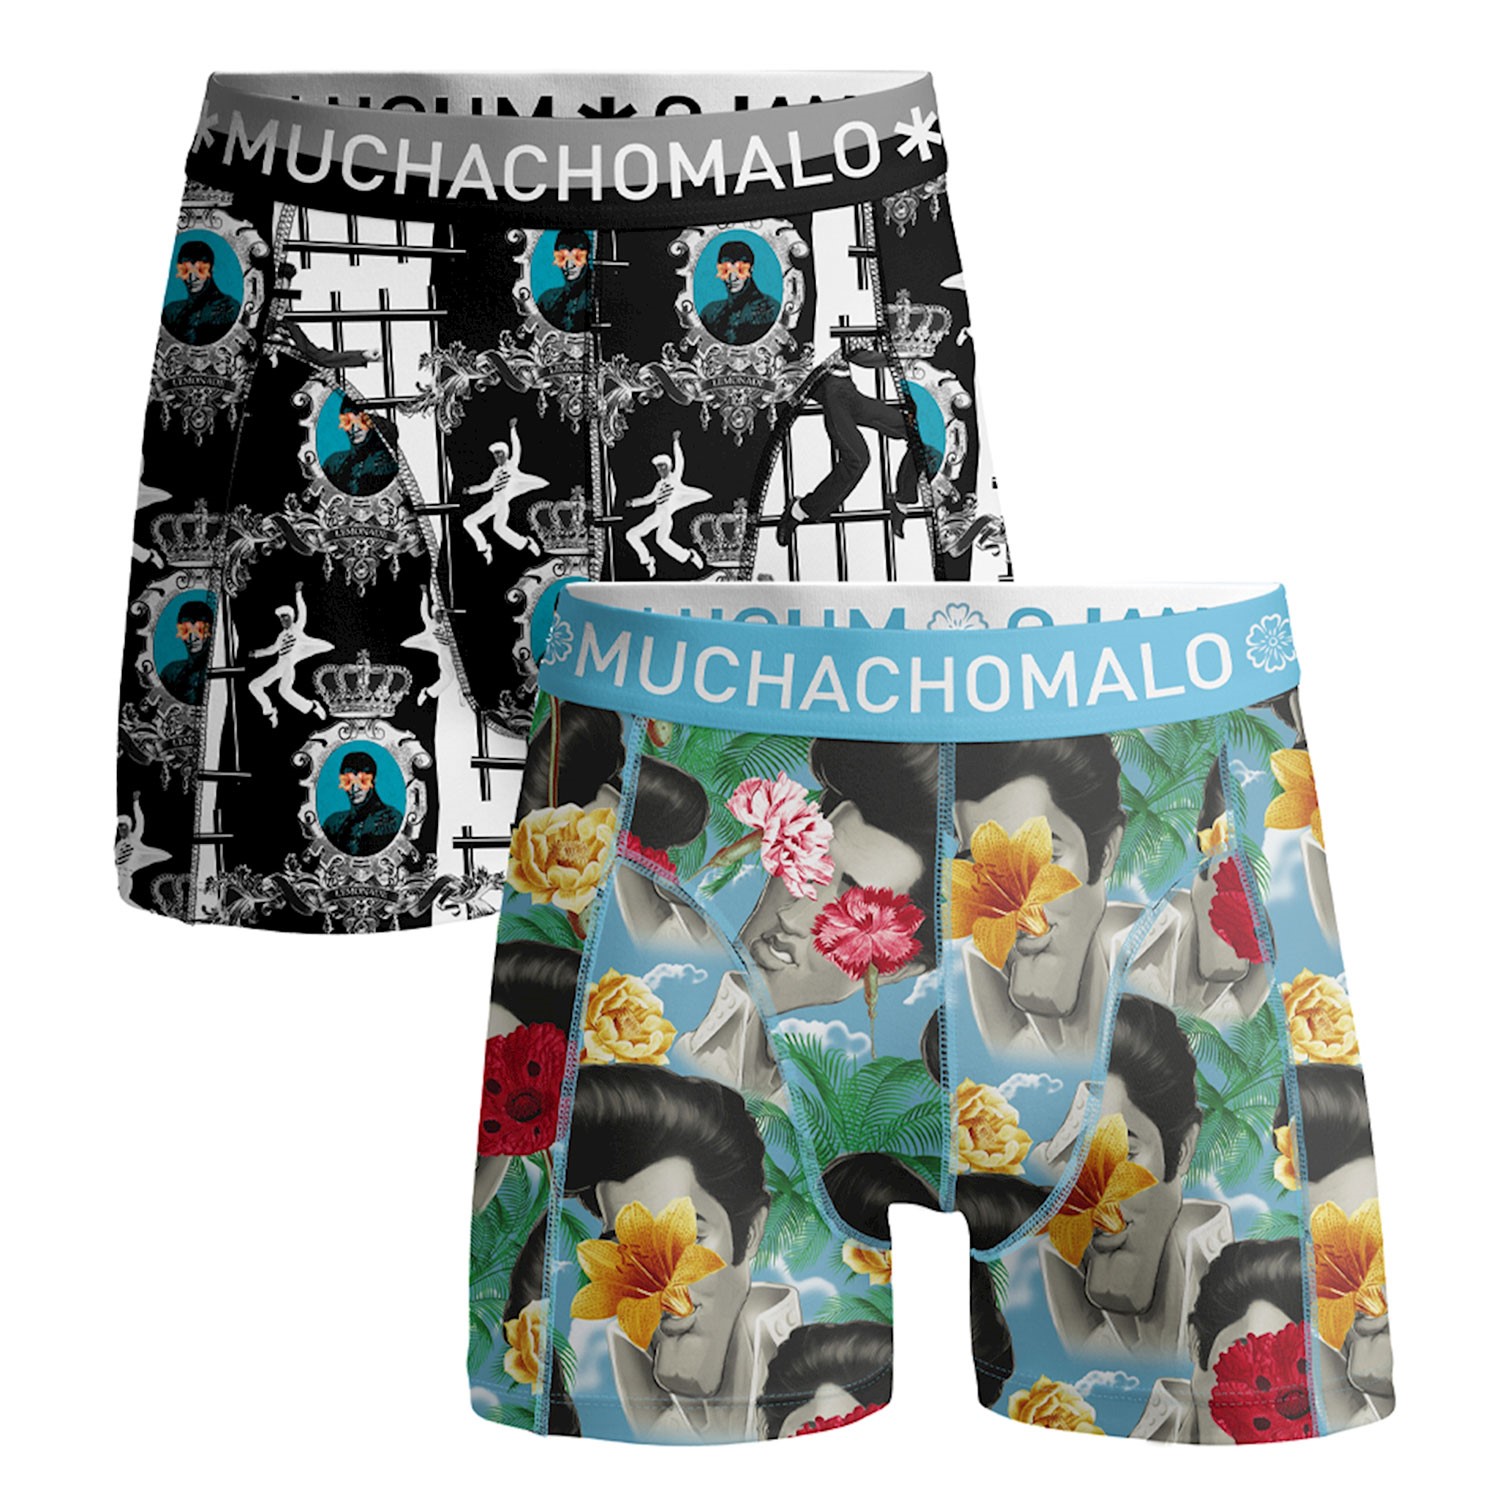 2-Pack Muchachomalo Cotton Stretch Elvis the King of Rock - Boxer